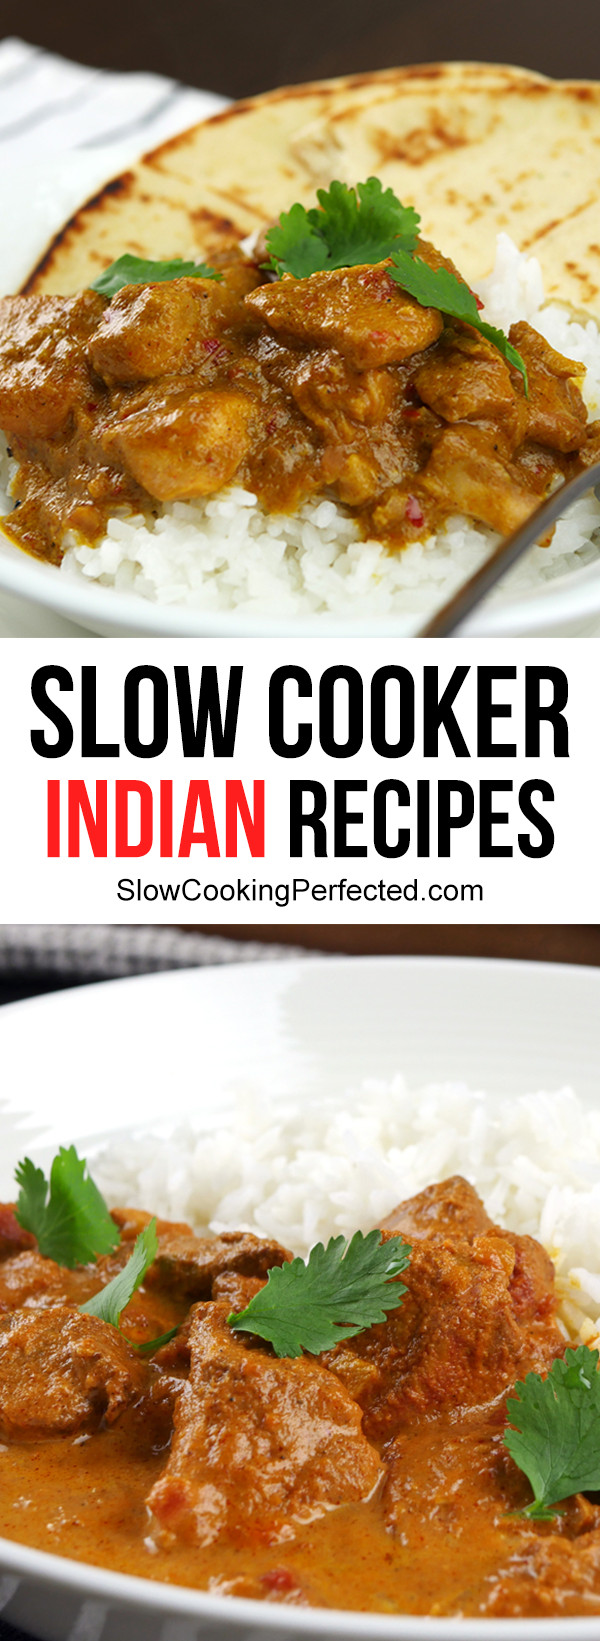 Slow Cooker Indian Vegetarian Recipes
 Slow Cooker Tomato Relish Recipe